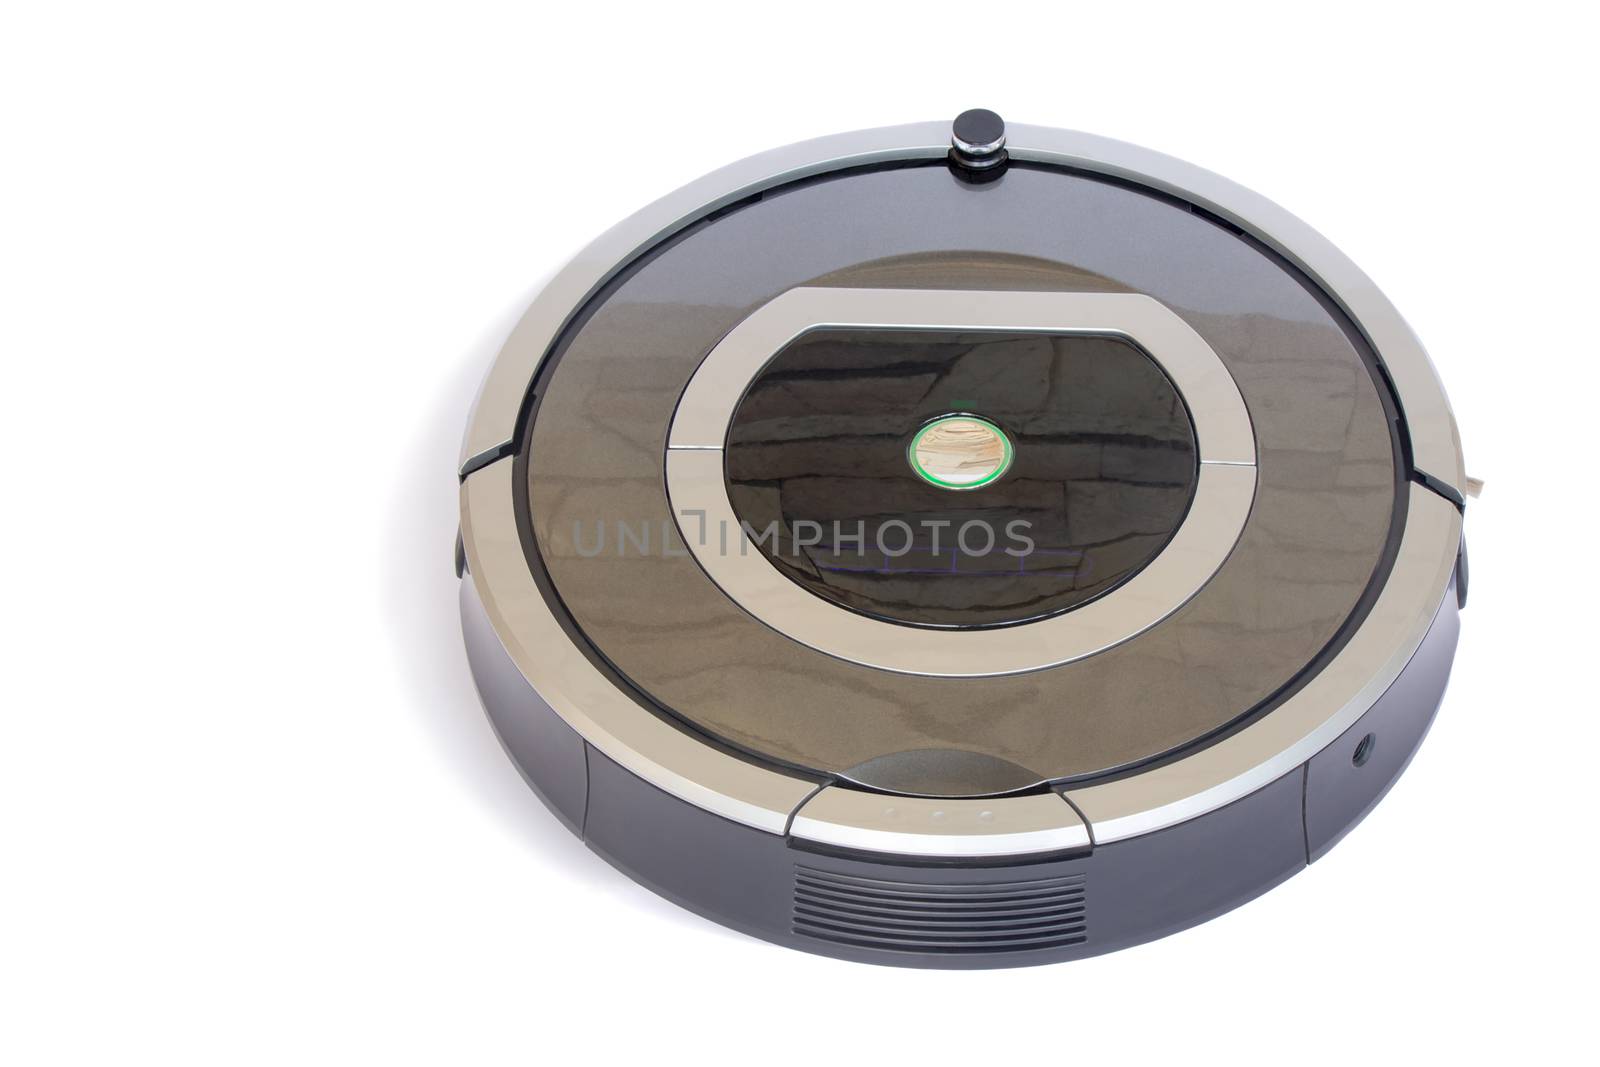 The automated robot vacuum cleaner of a roundish form, can make cleaning in hard-to-reach spots. It is presented on a white background.